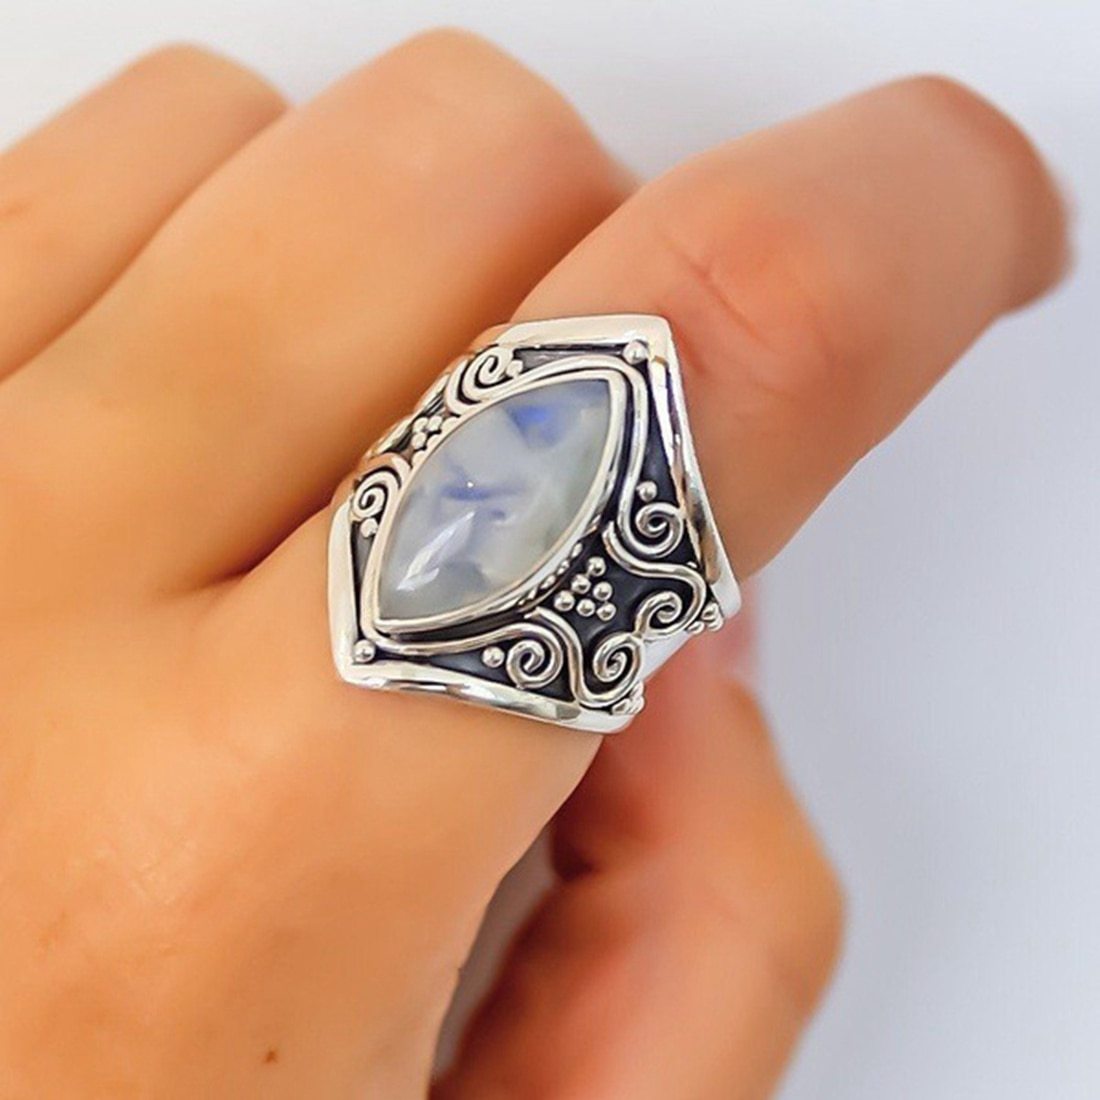 Vintage Silver Bohemian Fashion Stone Ring - The Young Hippie